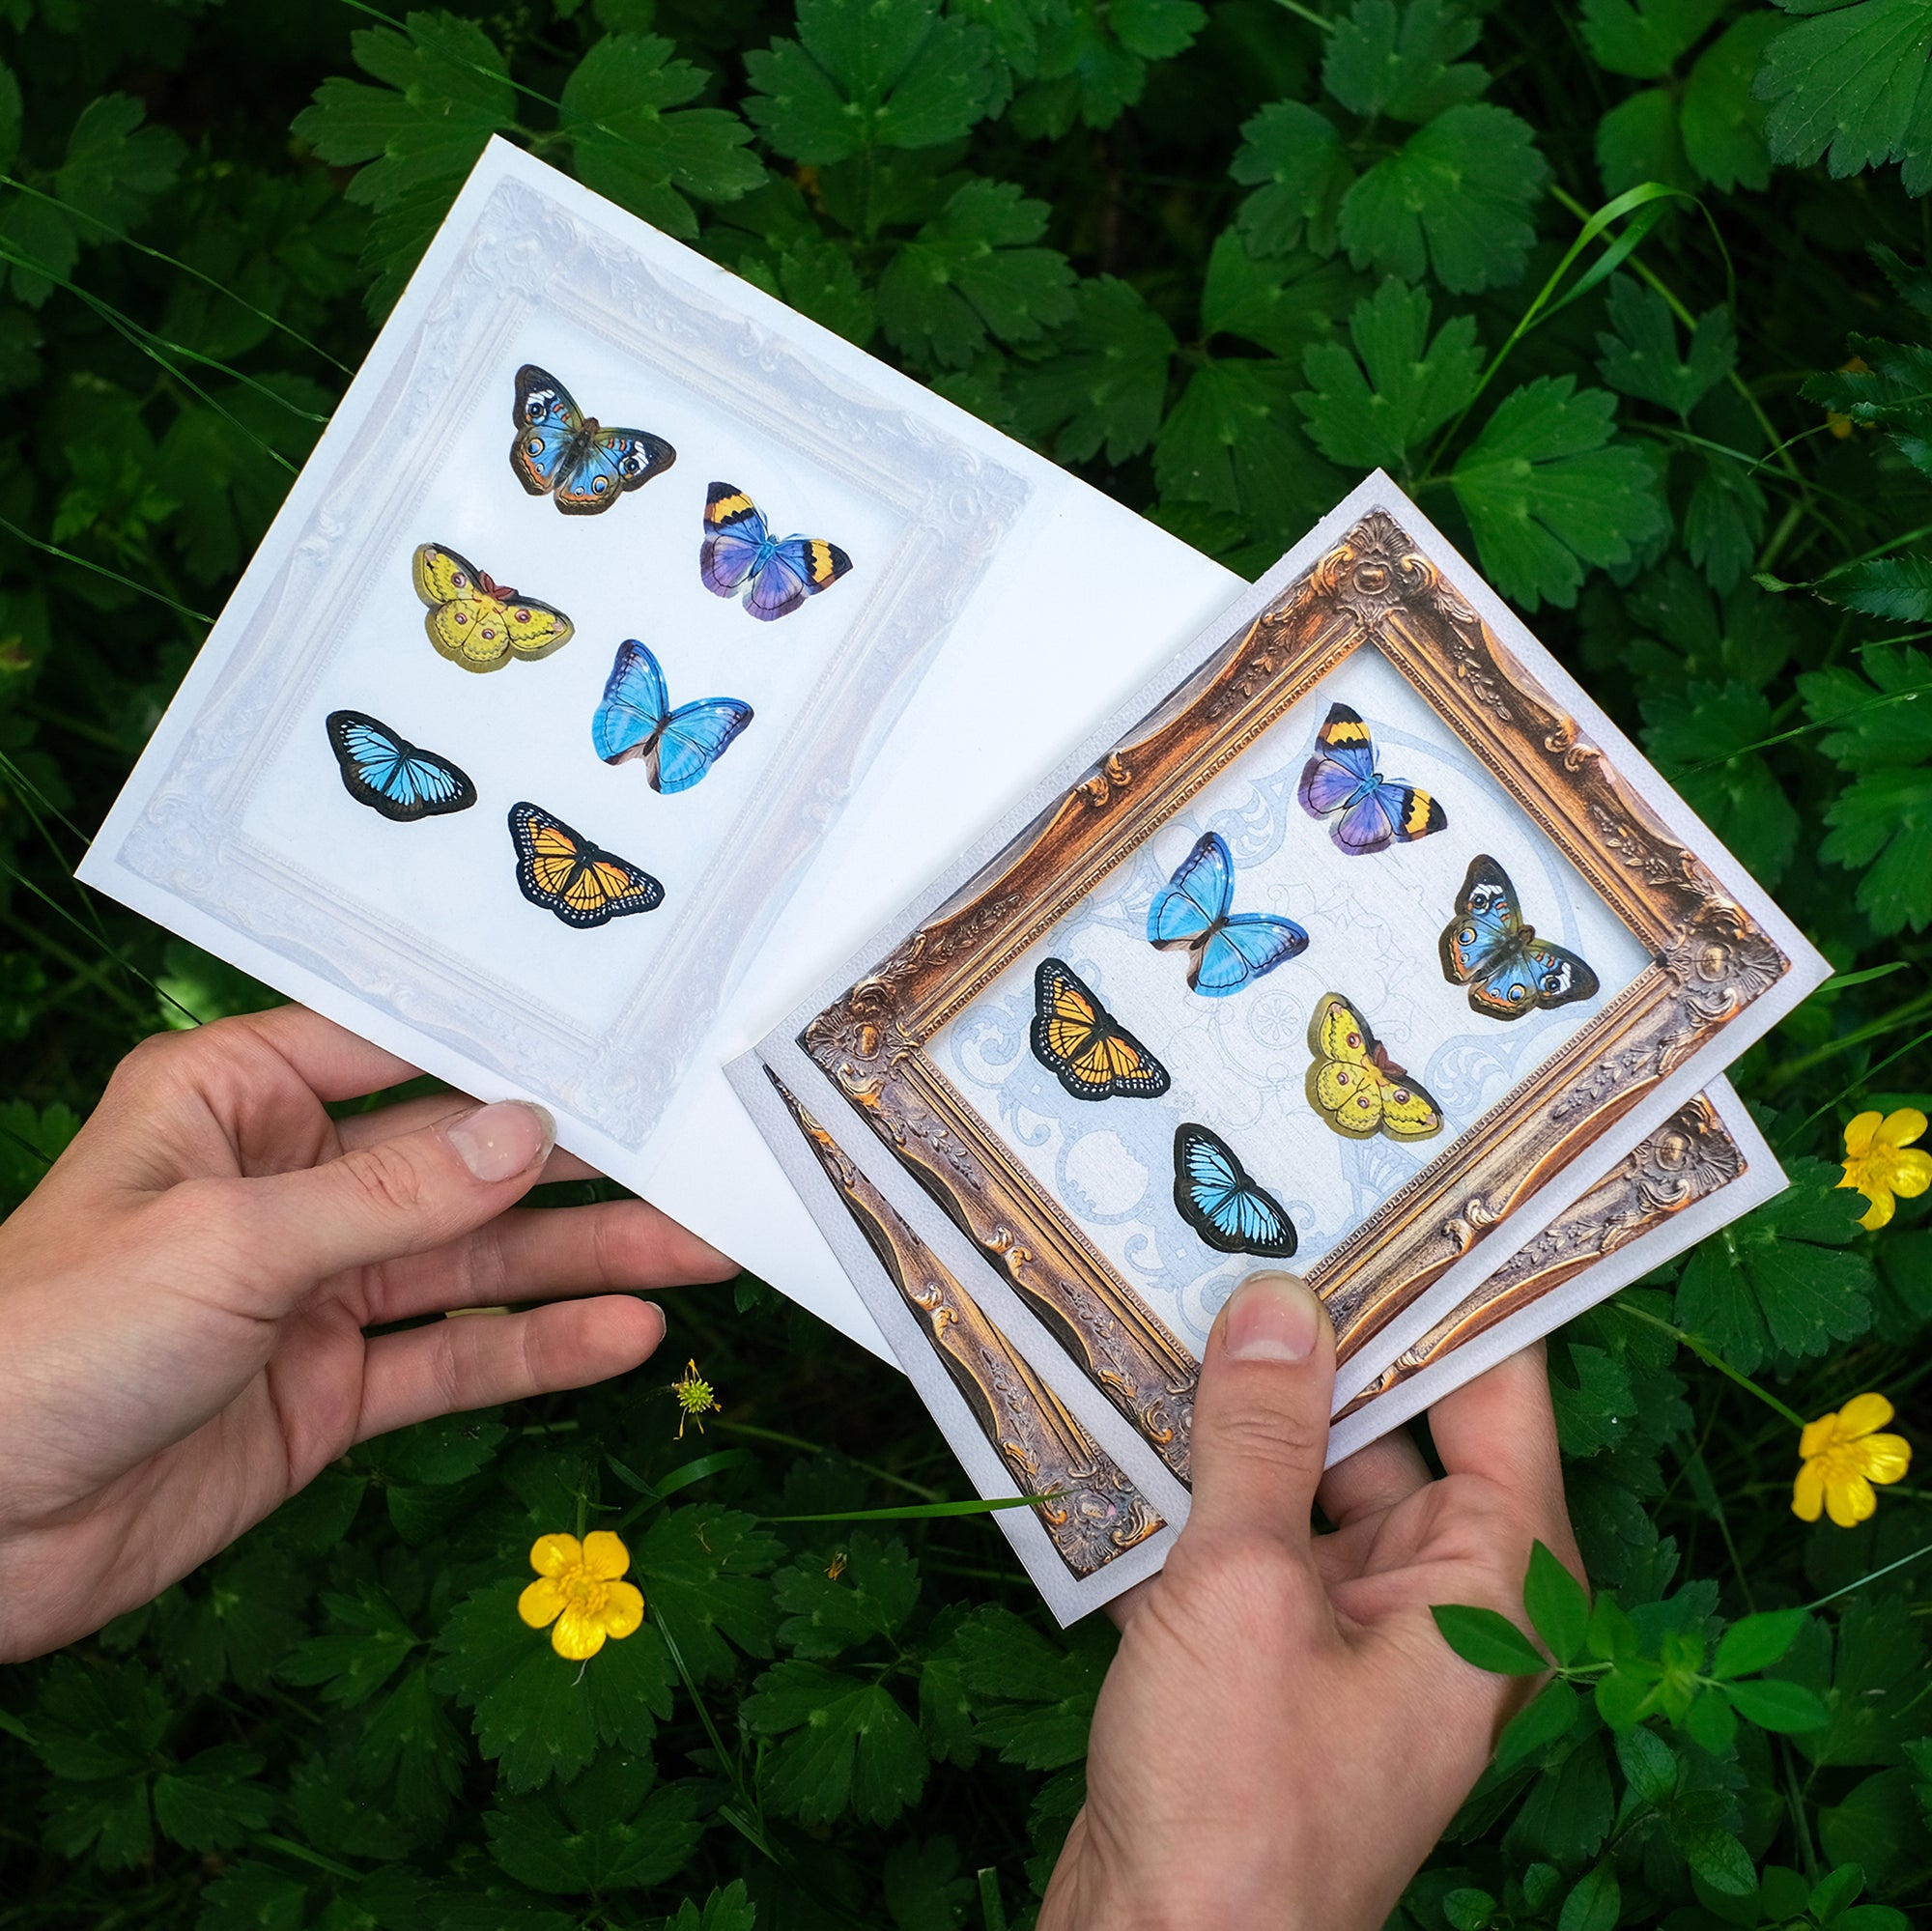 Mini Butterfly 'Pop-Out' Greeting Cards - Set of 3